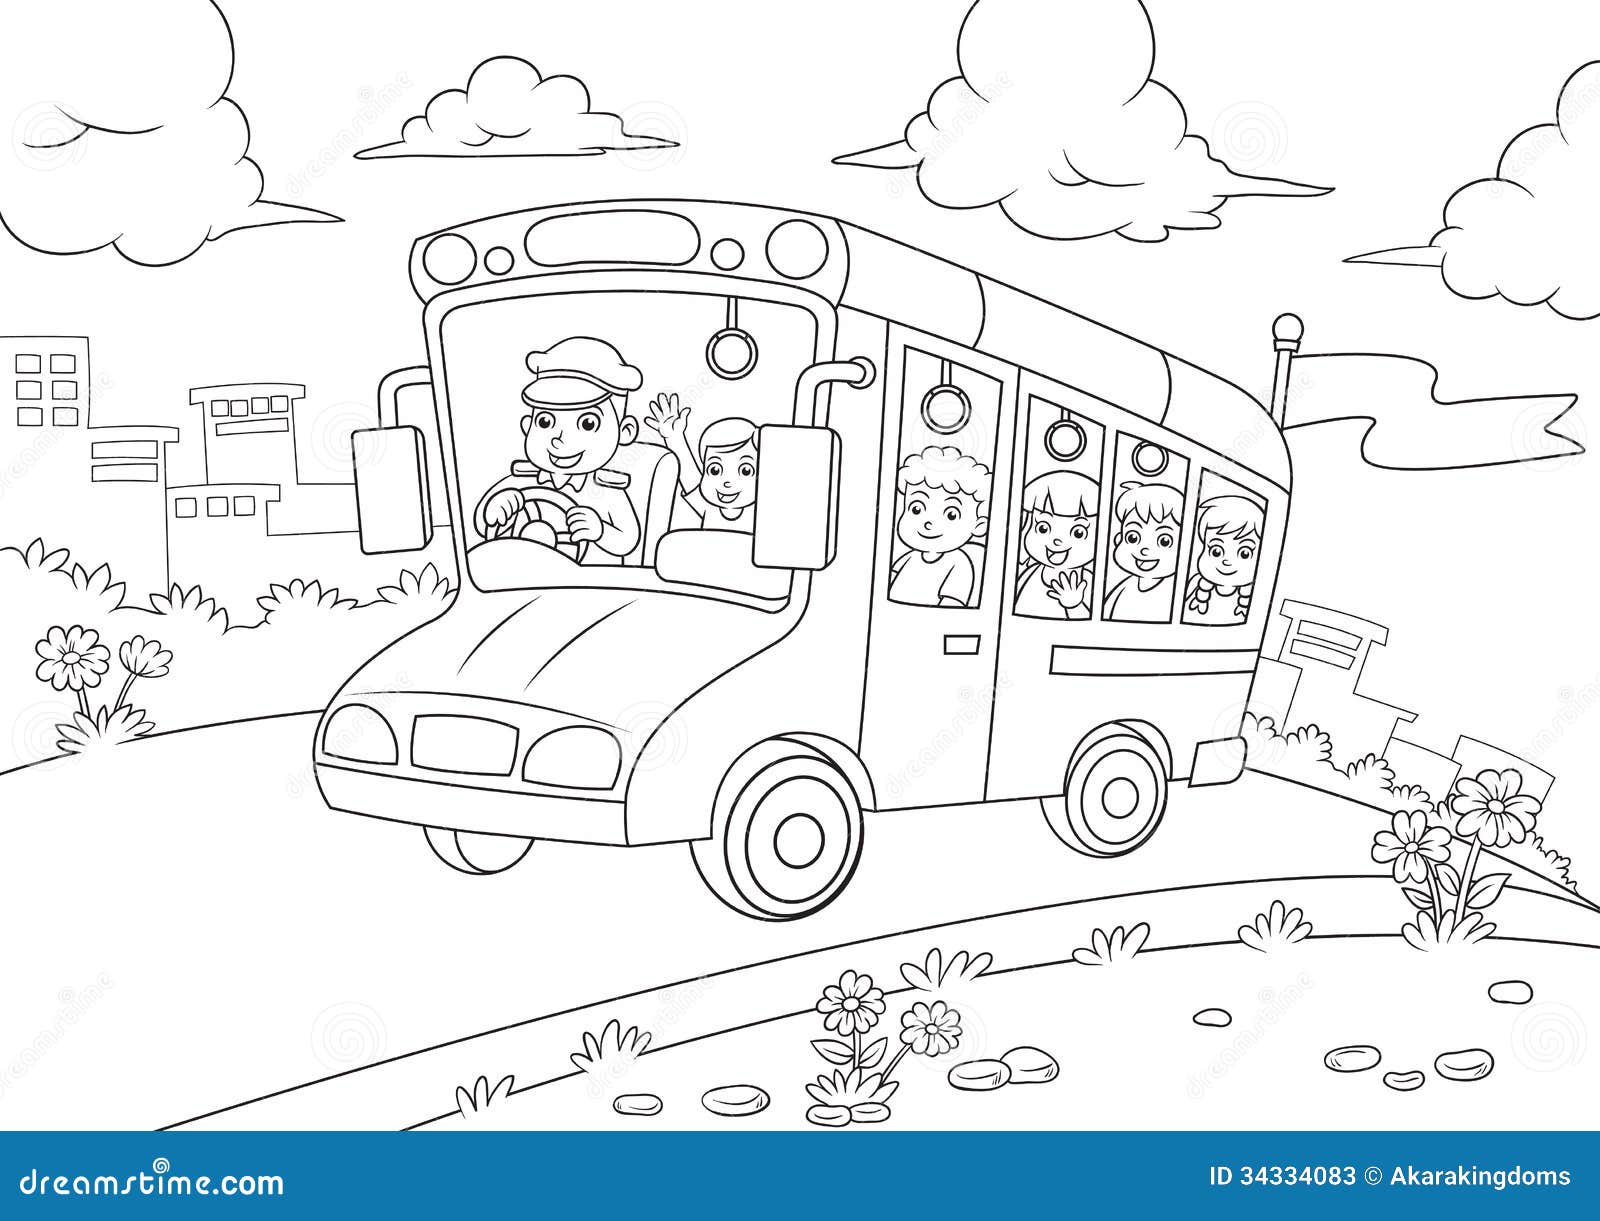 School bus outline for coloring book stock vector